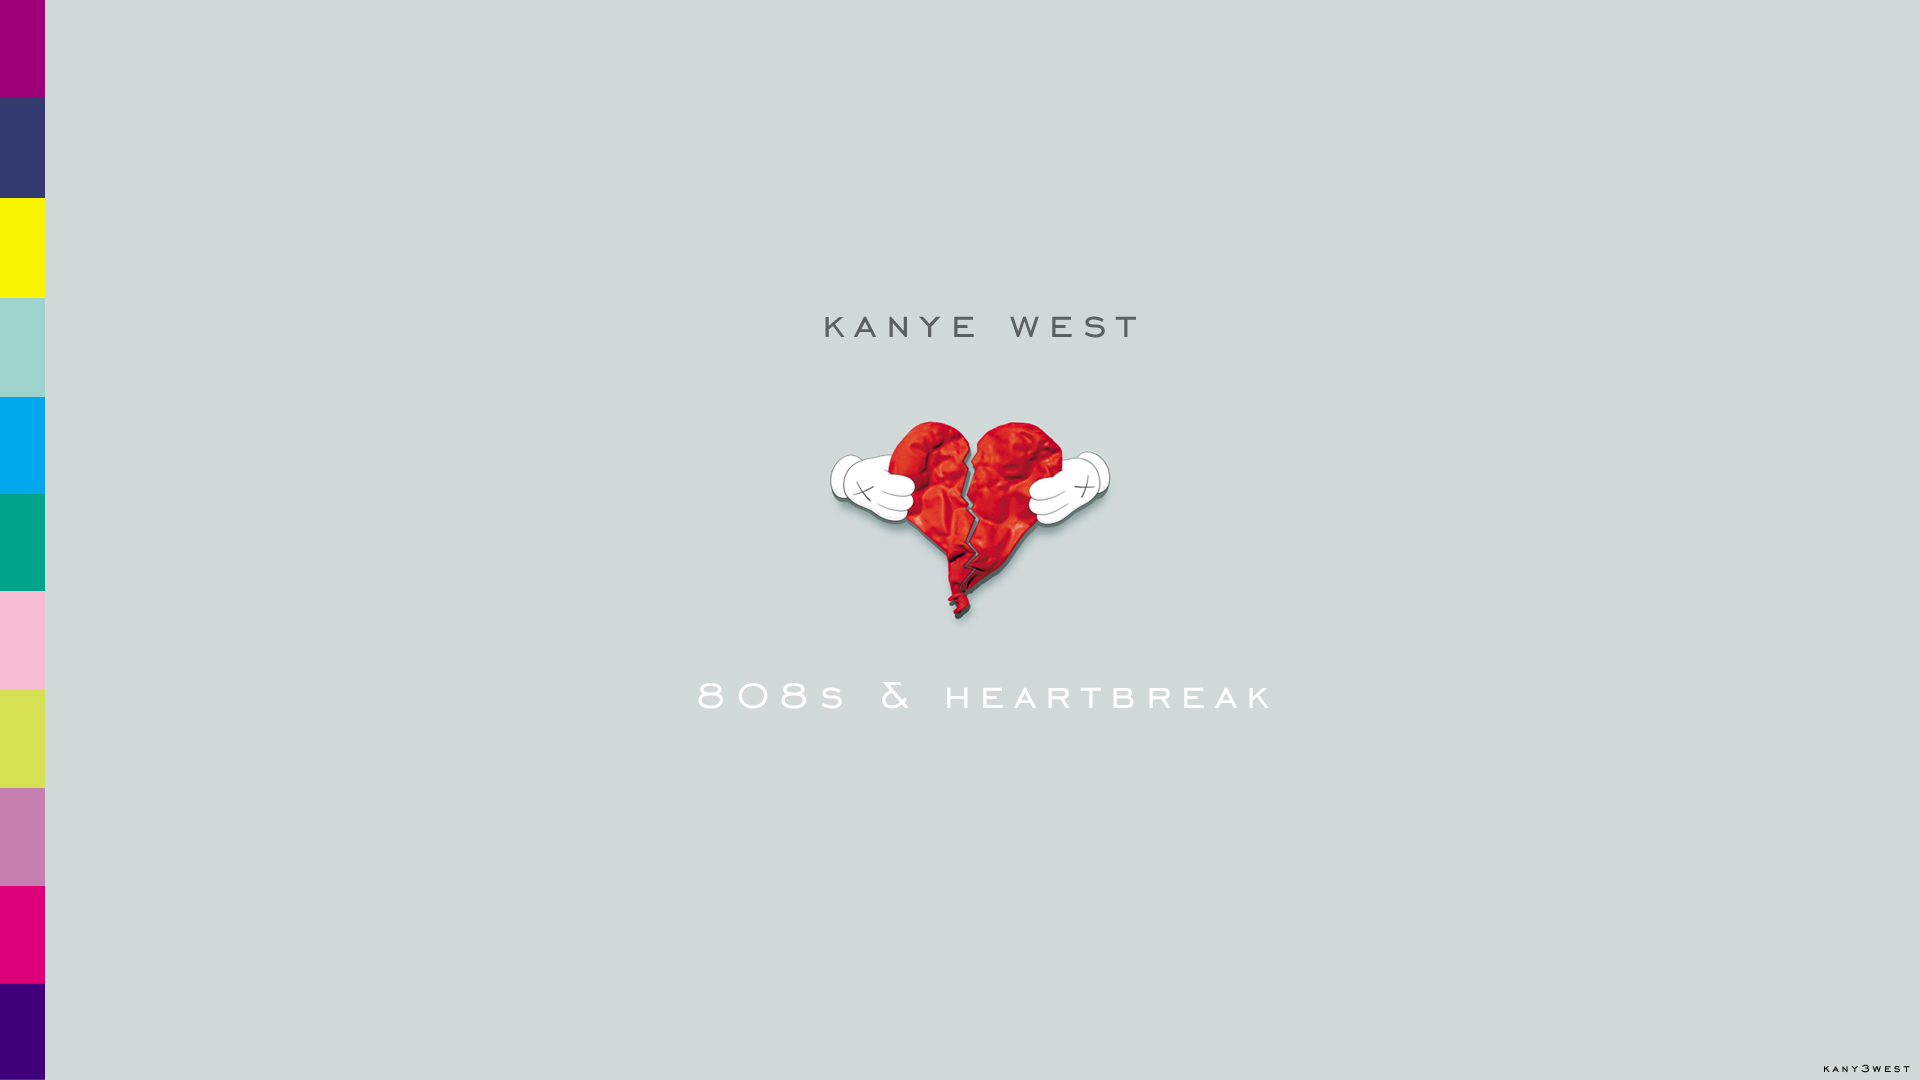 kanye west 808 and heartbreak zshare downloads